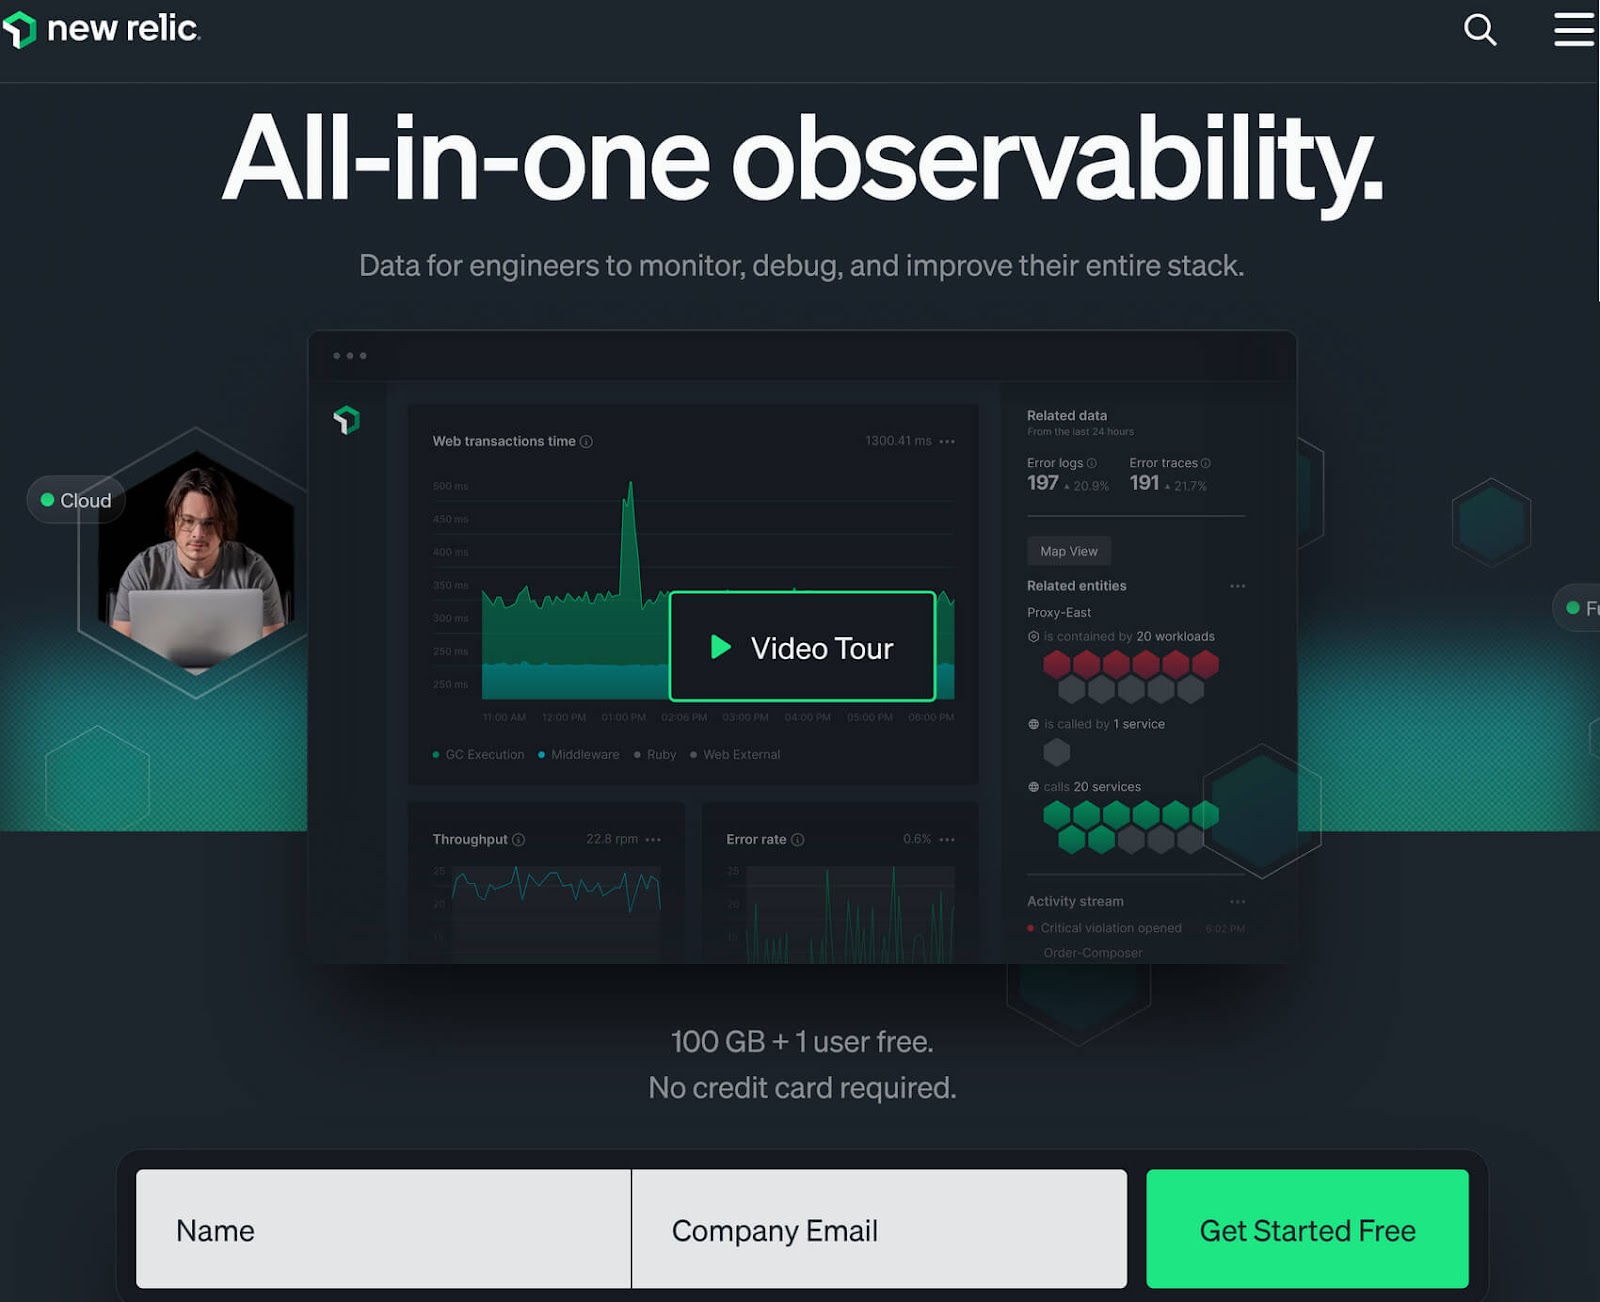 New Relic website promoting "All-in-one observability" with a "Get Started Free" fastener  successful  the little   right.